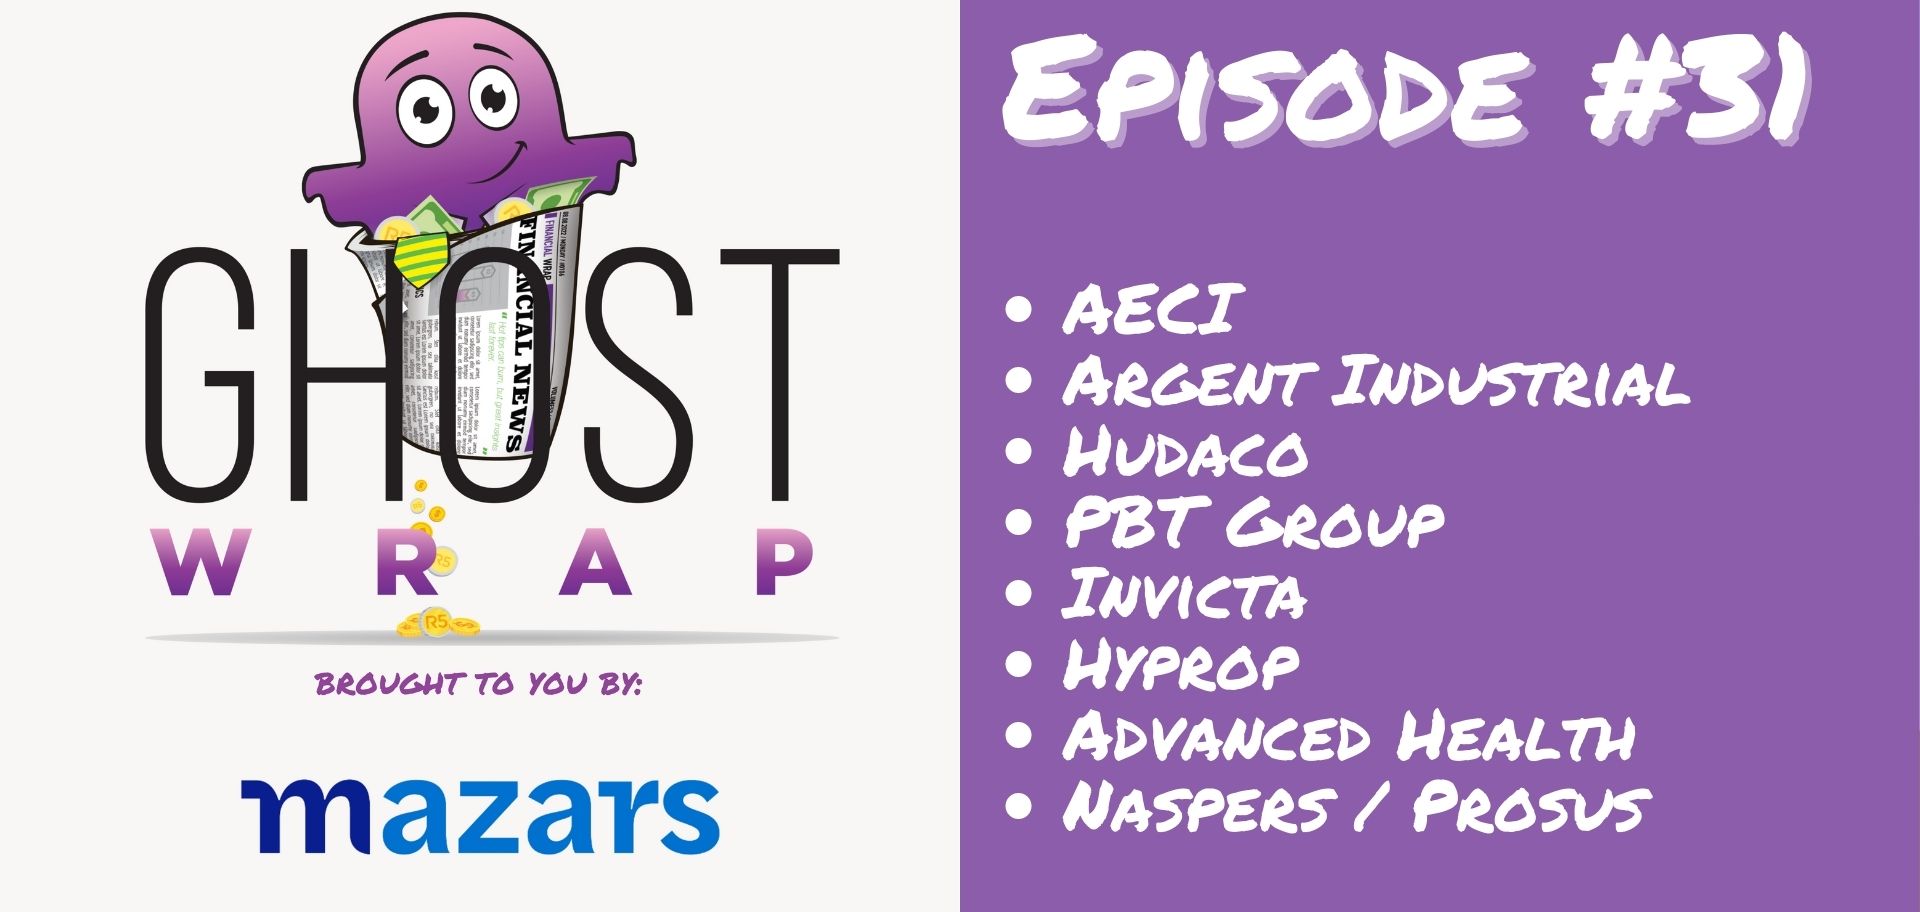 Ghost Wrap #31 (AECI | Argent Industrial | Hudaco | PBT Group | Invicta | Hyprop | Advanced Health | Naspers + Prosus)